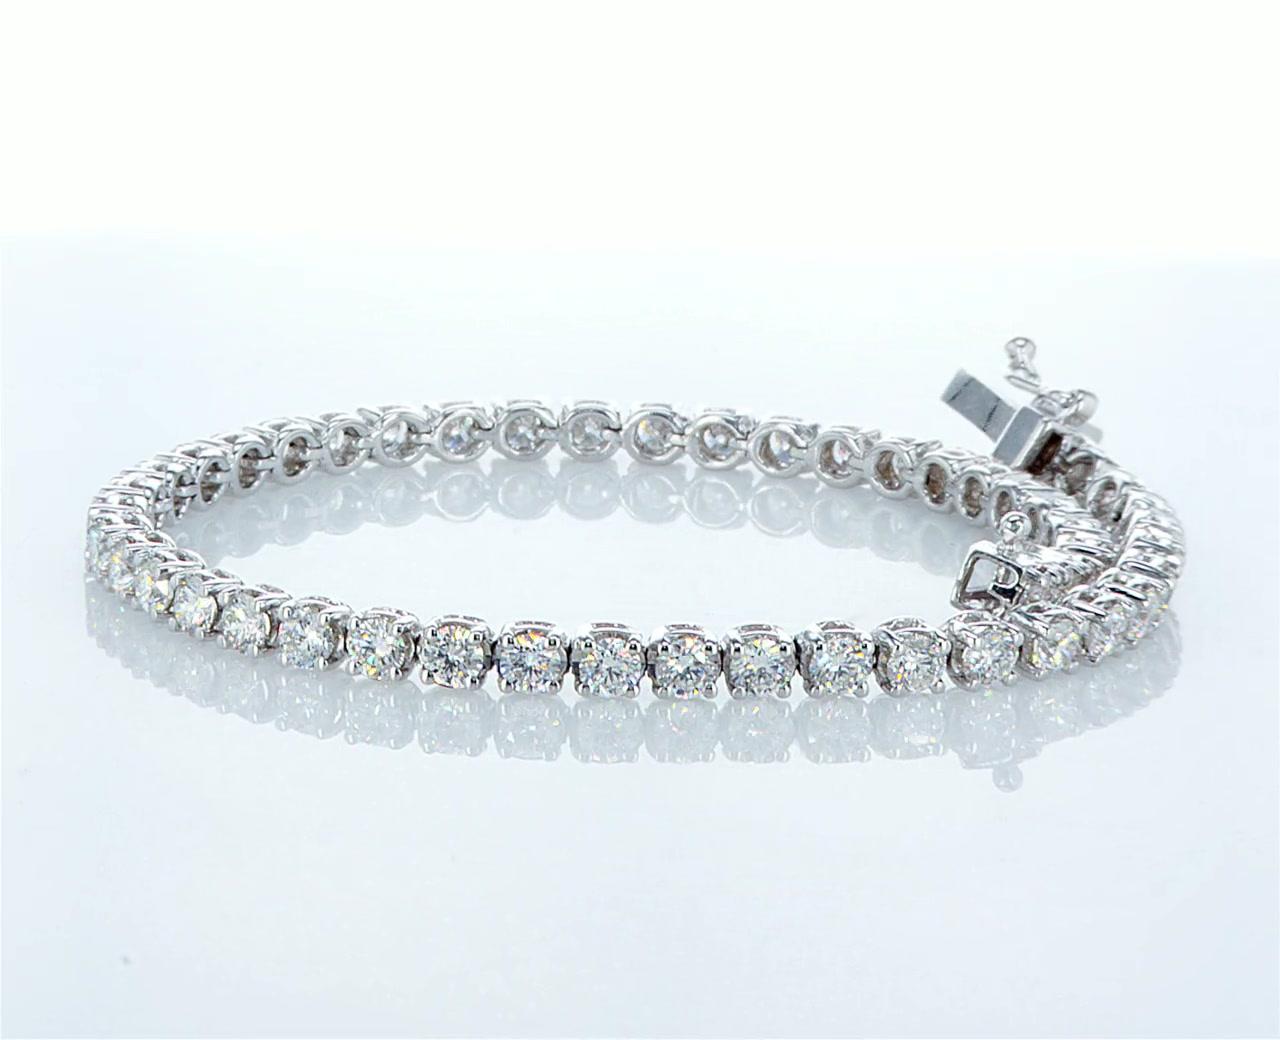 Our classic handcrafted Diamond Tennis Bracelet showcasing 50 stunning Round Brilliant cut diamonds 5.39 Carat total weight, D color and VS Clarity. 
The timeless tennis bracelet is made with precise craftsmanship and set on 14K white gold. 
The